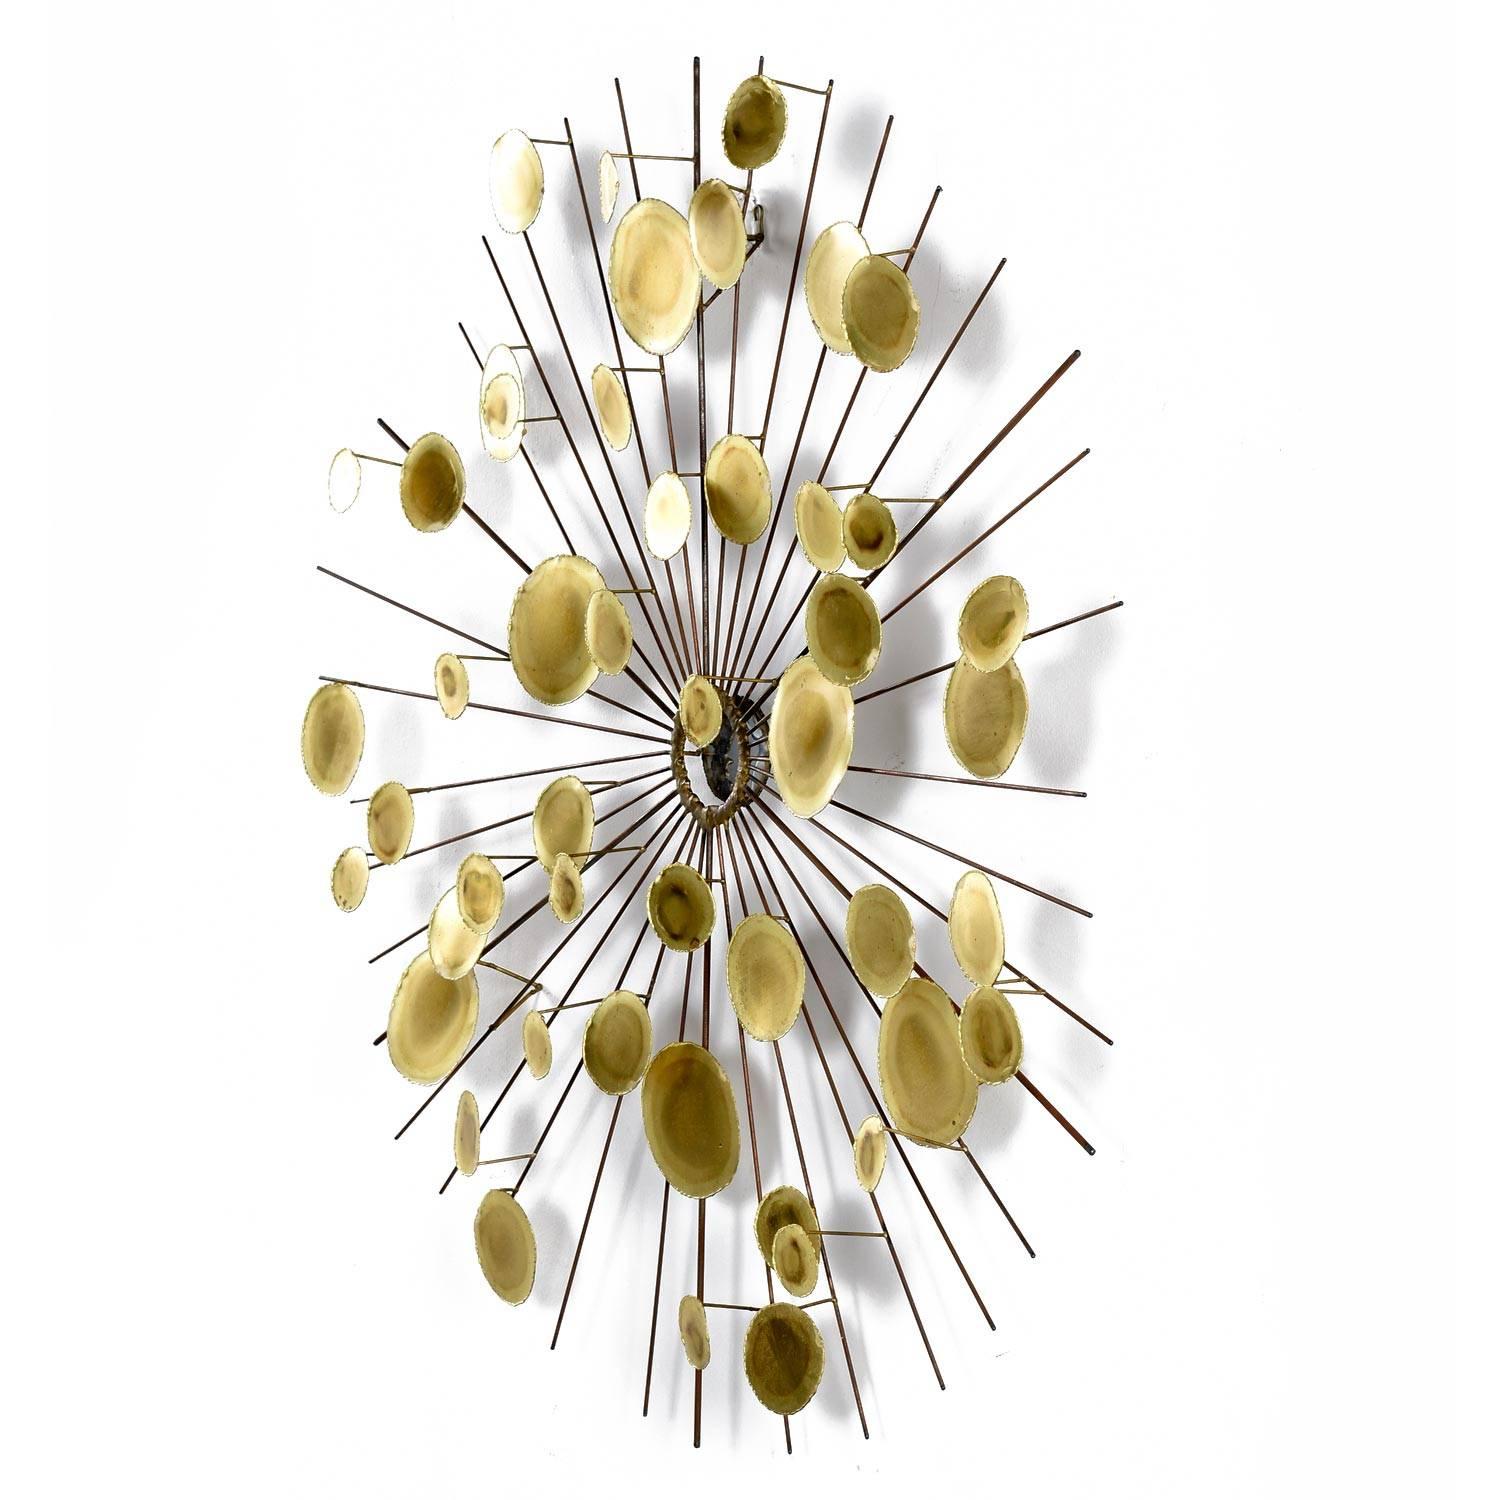 This striking Mid-Century Modern large sunburst wall sculpture is in the style of Curtis Jere, circa 1970s. Metal spires radiate from the mirrored brass centre and expand outward with three-dimensional gold tone polished brass medallions welded into